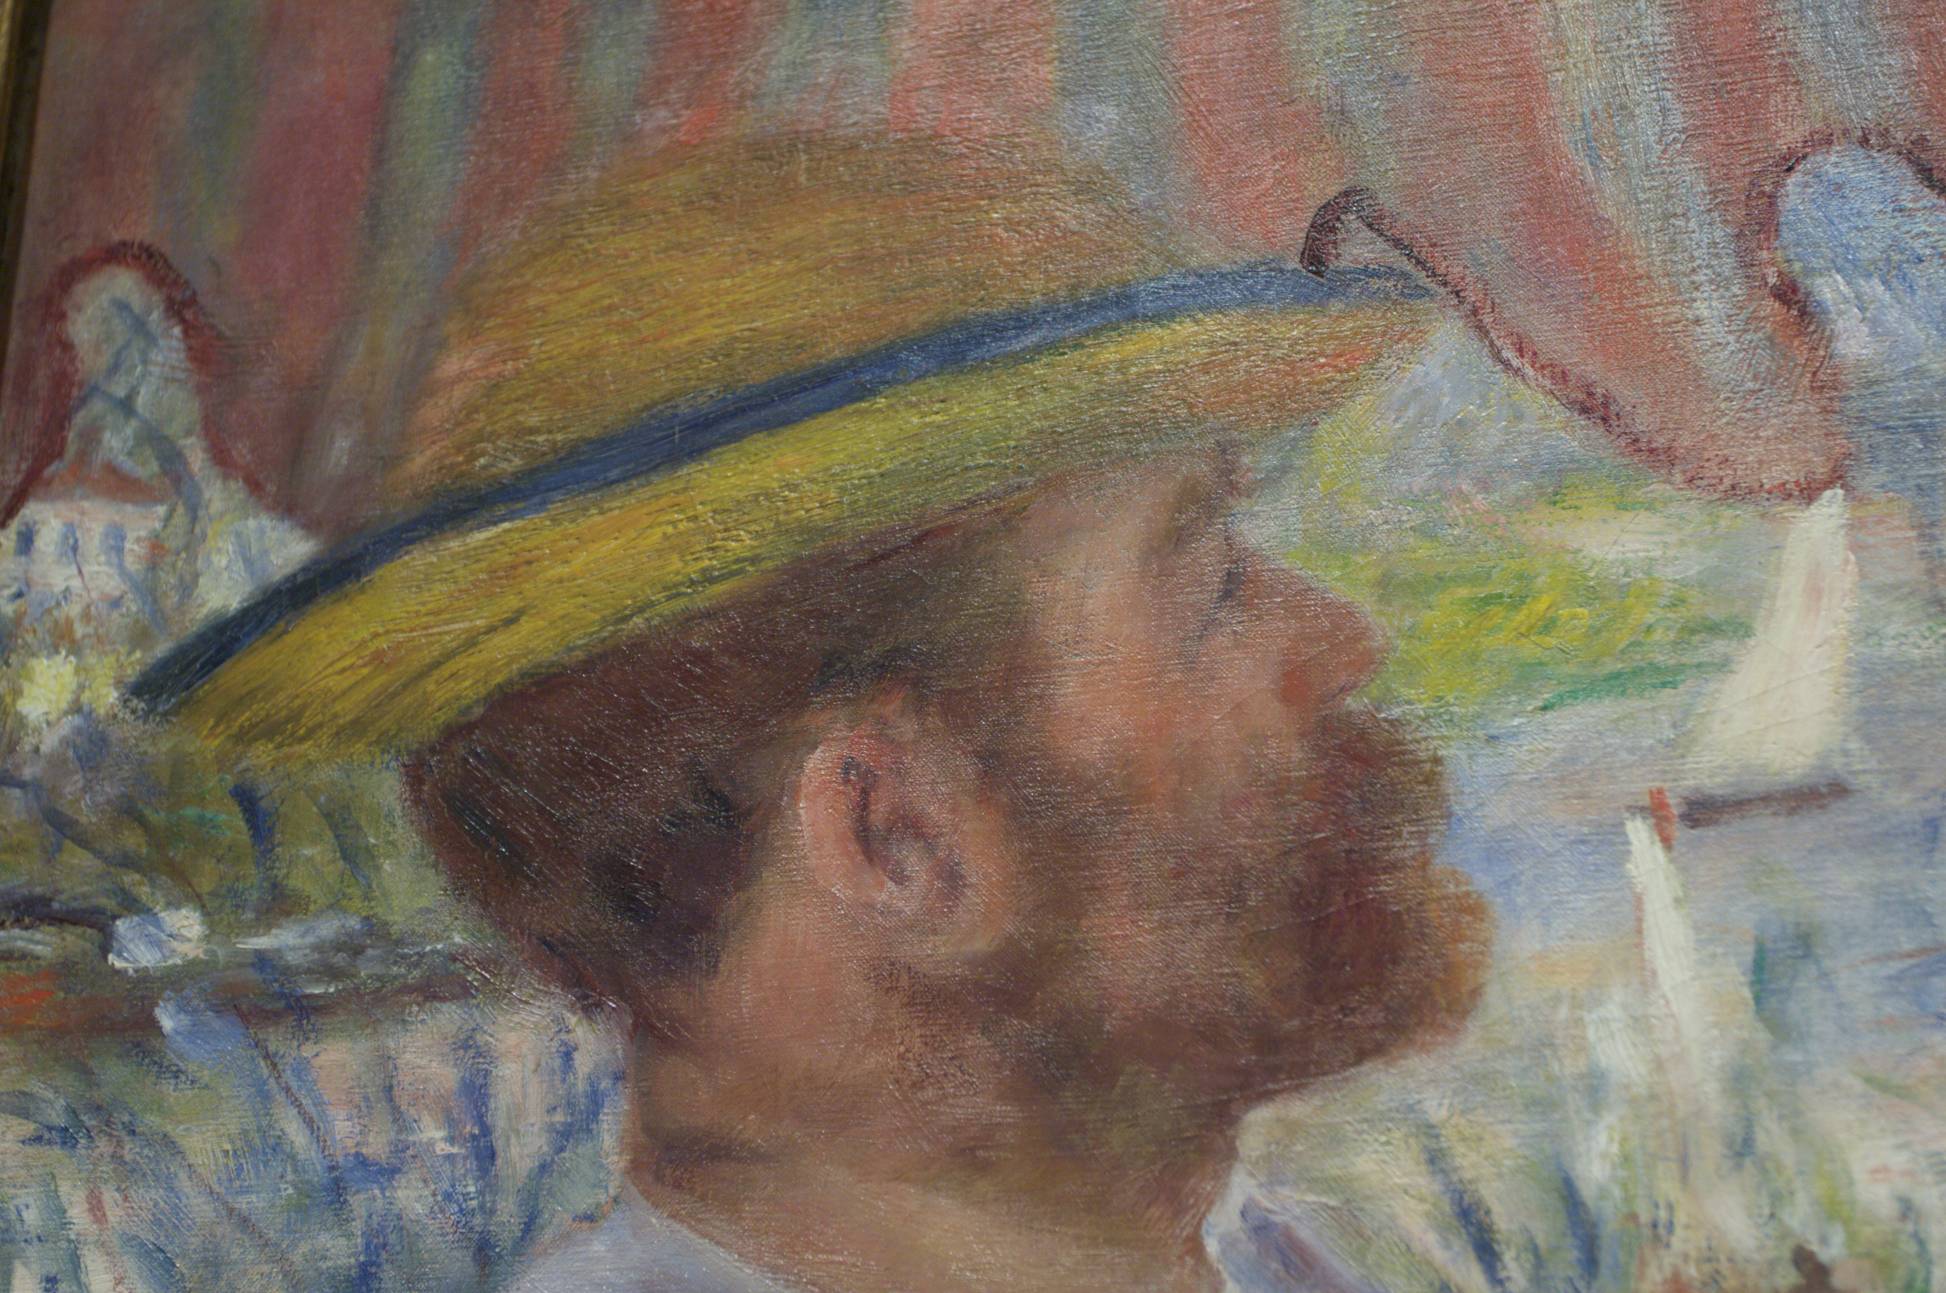 Renoir: Luncheon of the Boating Party